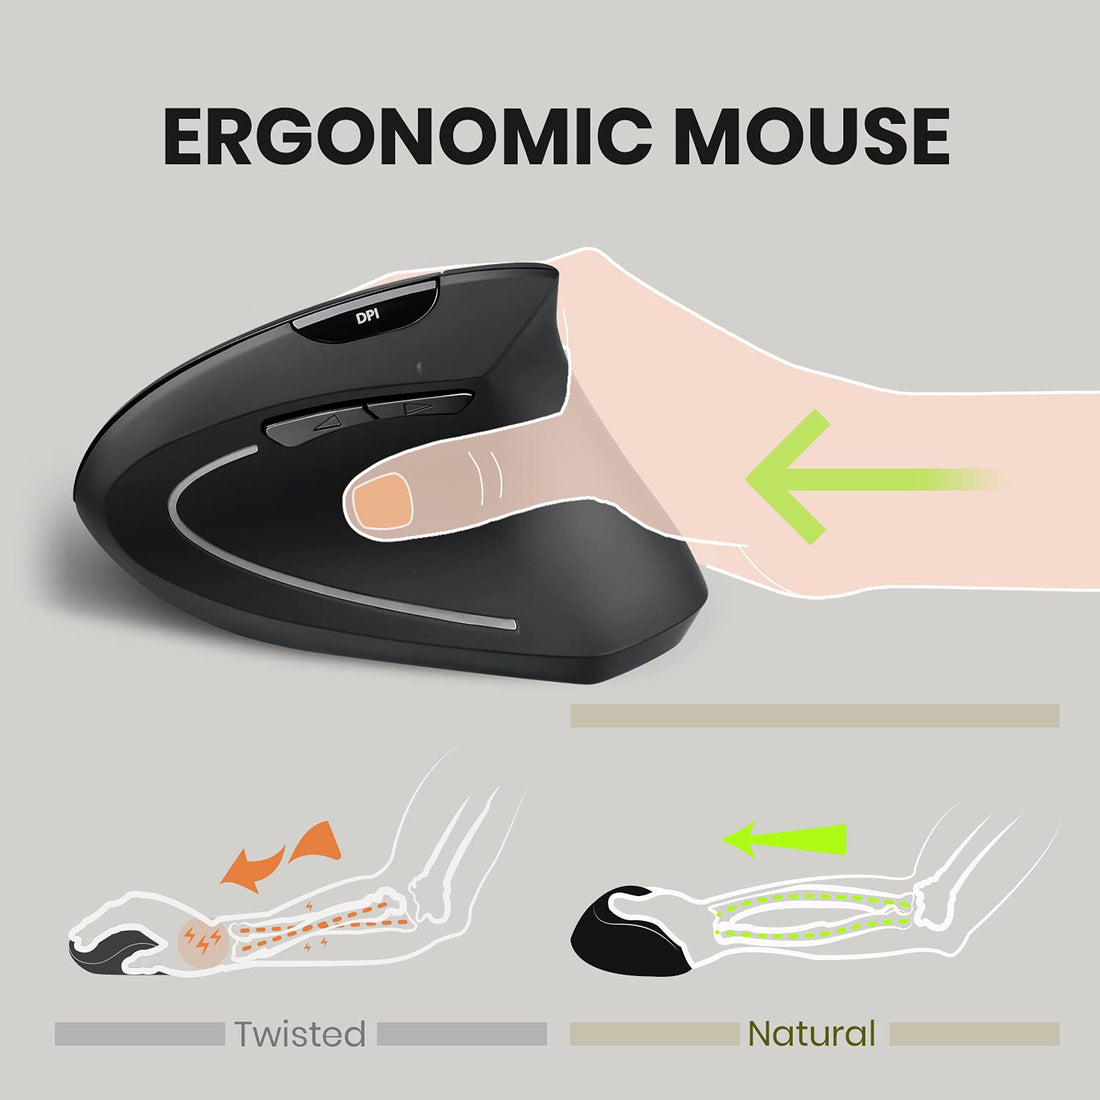 Perixx [Hardware Update] Perixx PERIMICE-713N, Wireless Ergonomic Vertical Mouse -Nano Receiver -1000/1500/2000 DPI -On/Off Power Switch - Natural Ergonomic Vertical Design - Recommended with RSI User